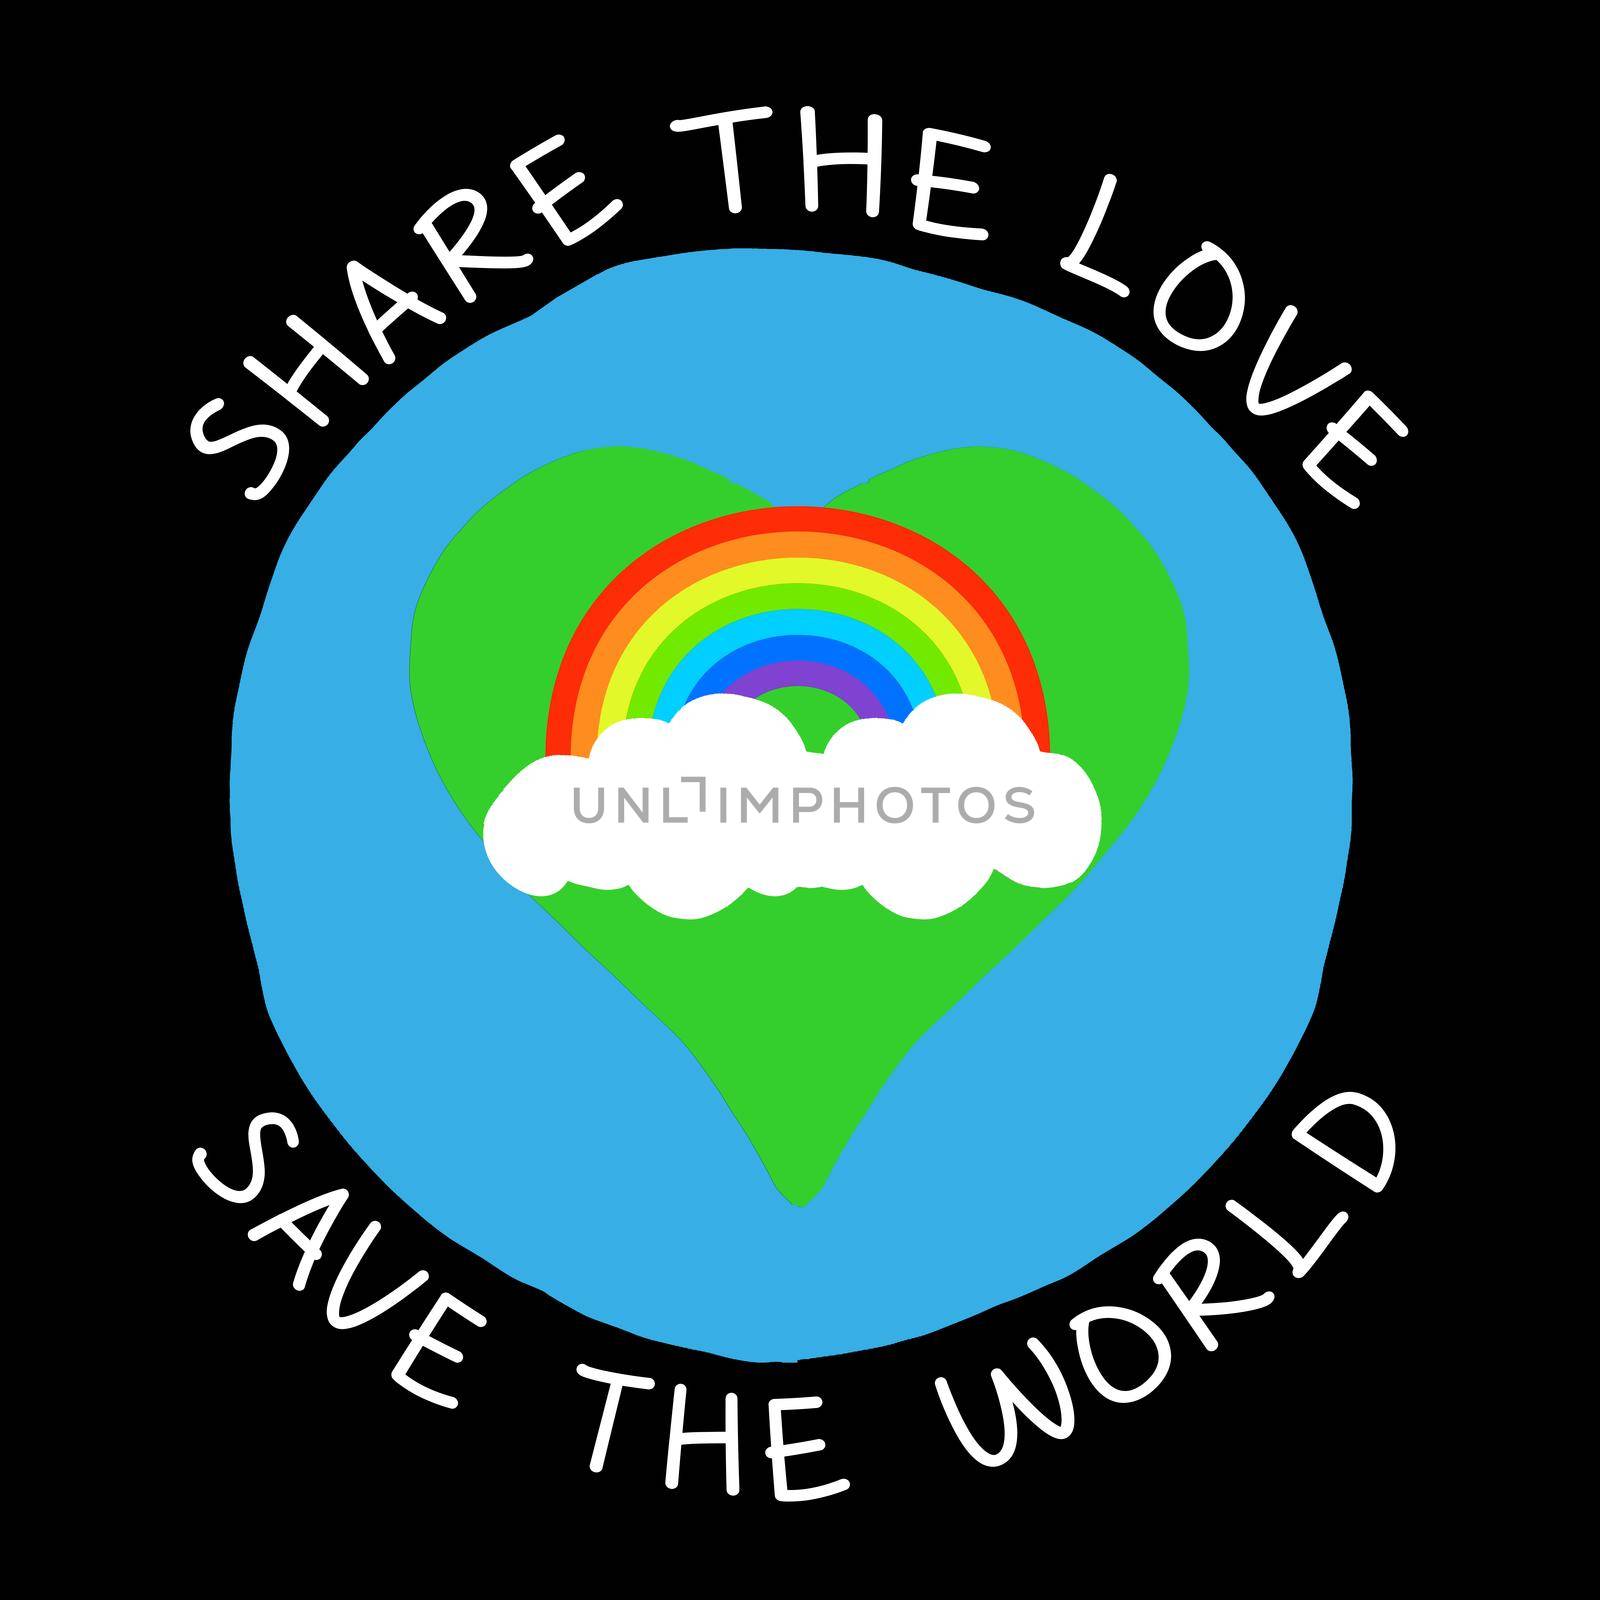 Share the love save the world by Bigalbaloo